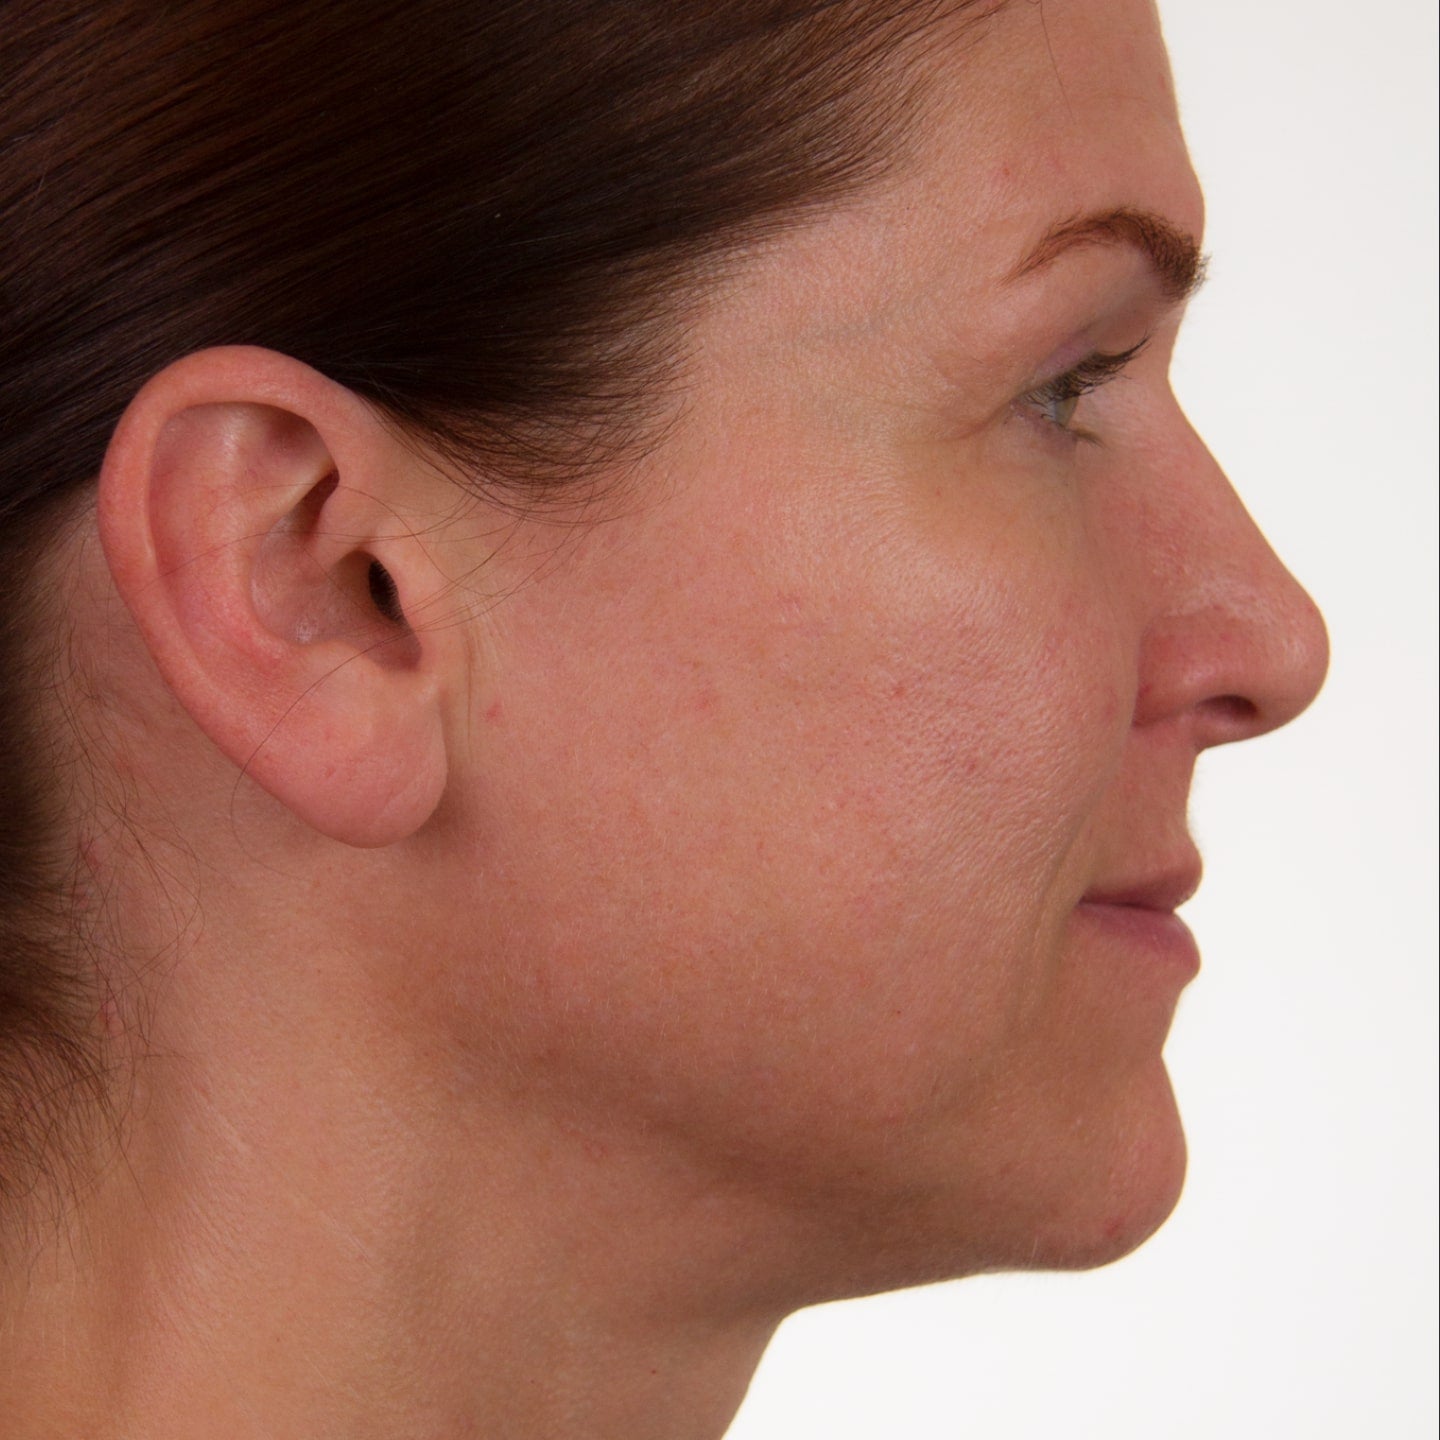 Close up photo of a woman's face, showing her side profile